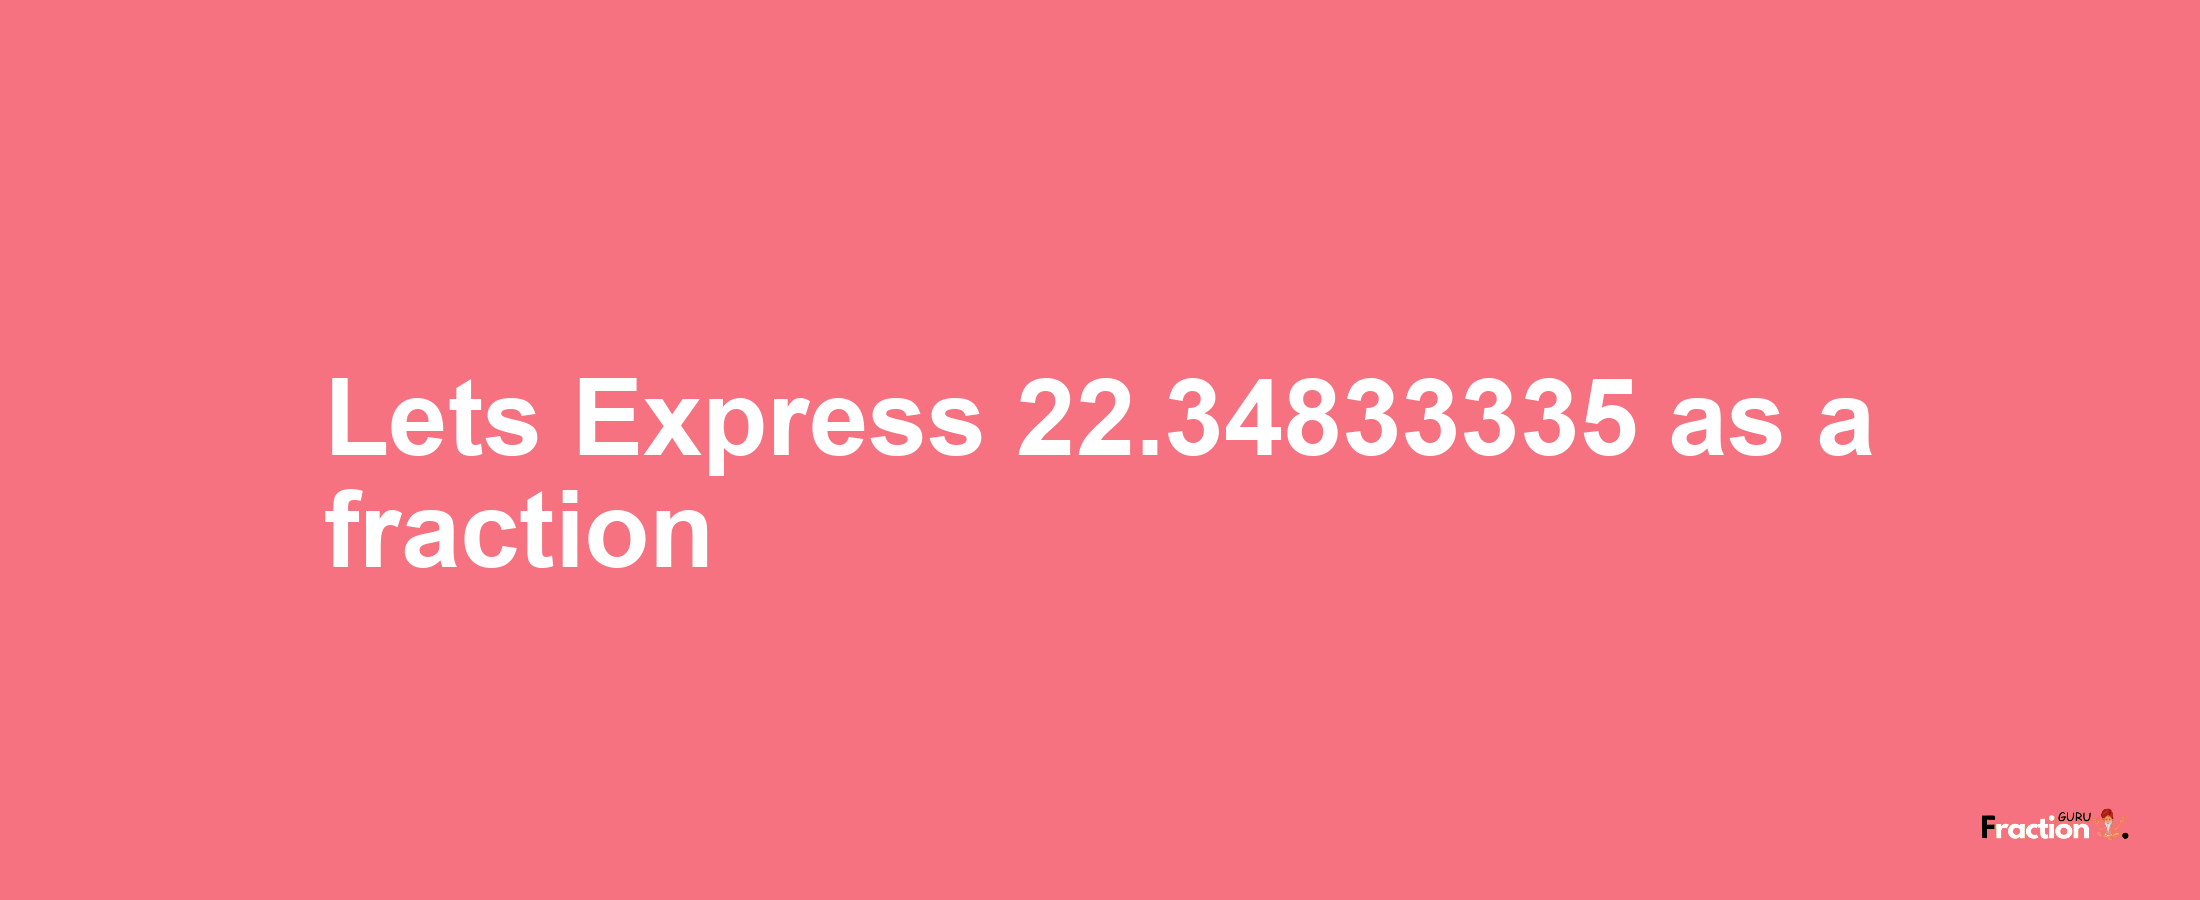 Lets Express 22.34833335 as afraction